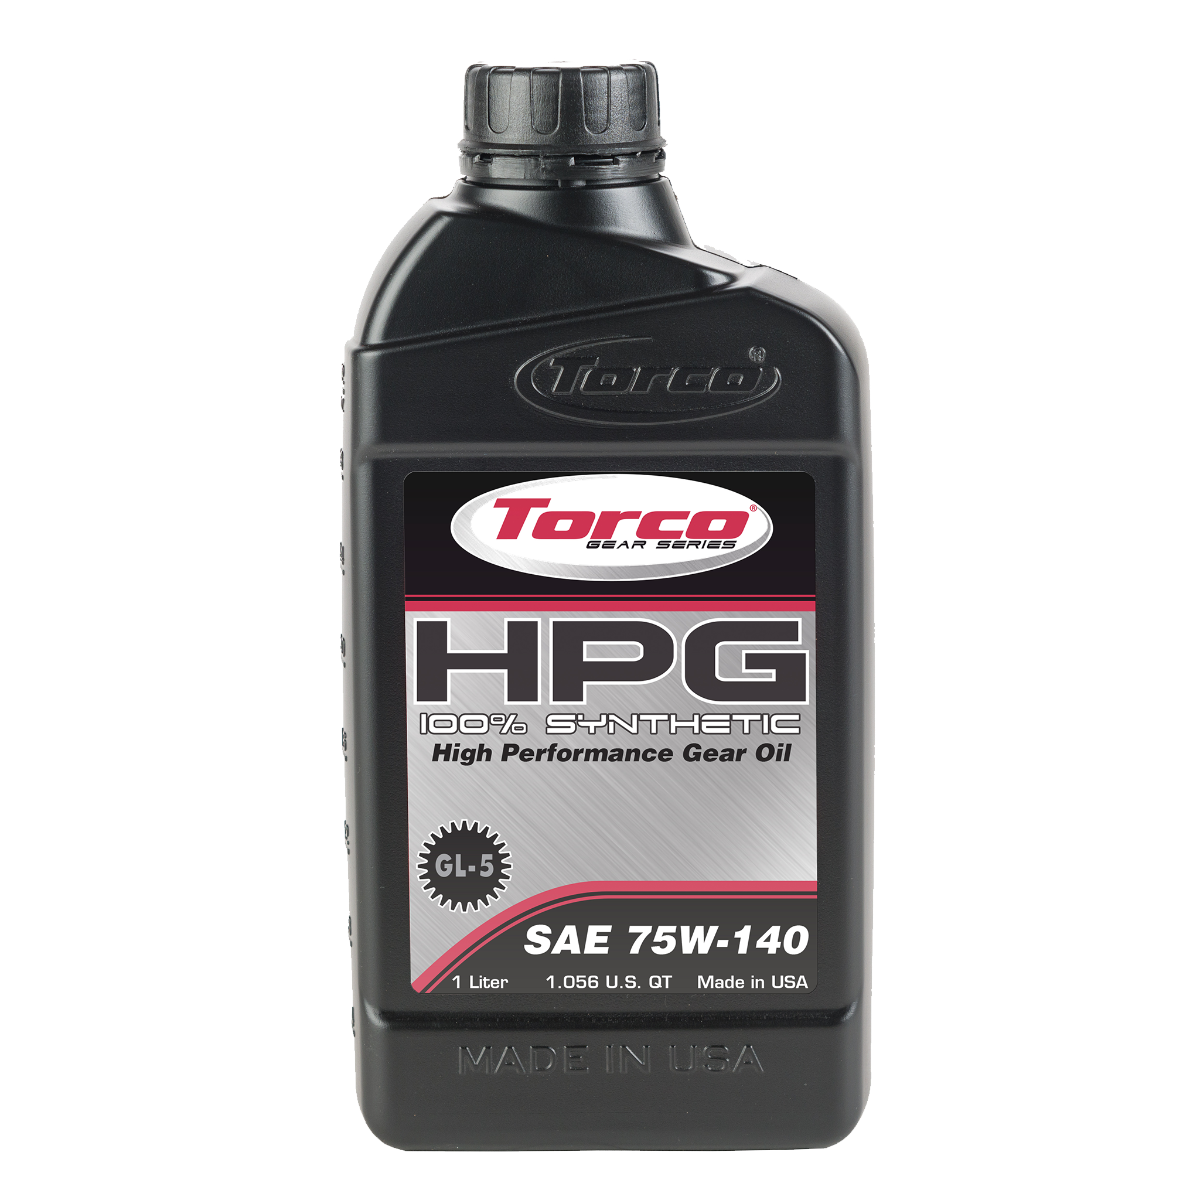 Hpg High Performance Synthetic Gear Oil 75w90 75w140 Torcousa